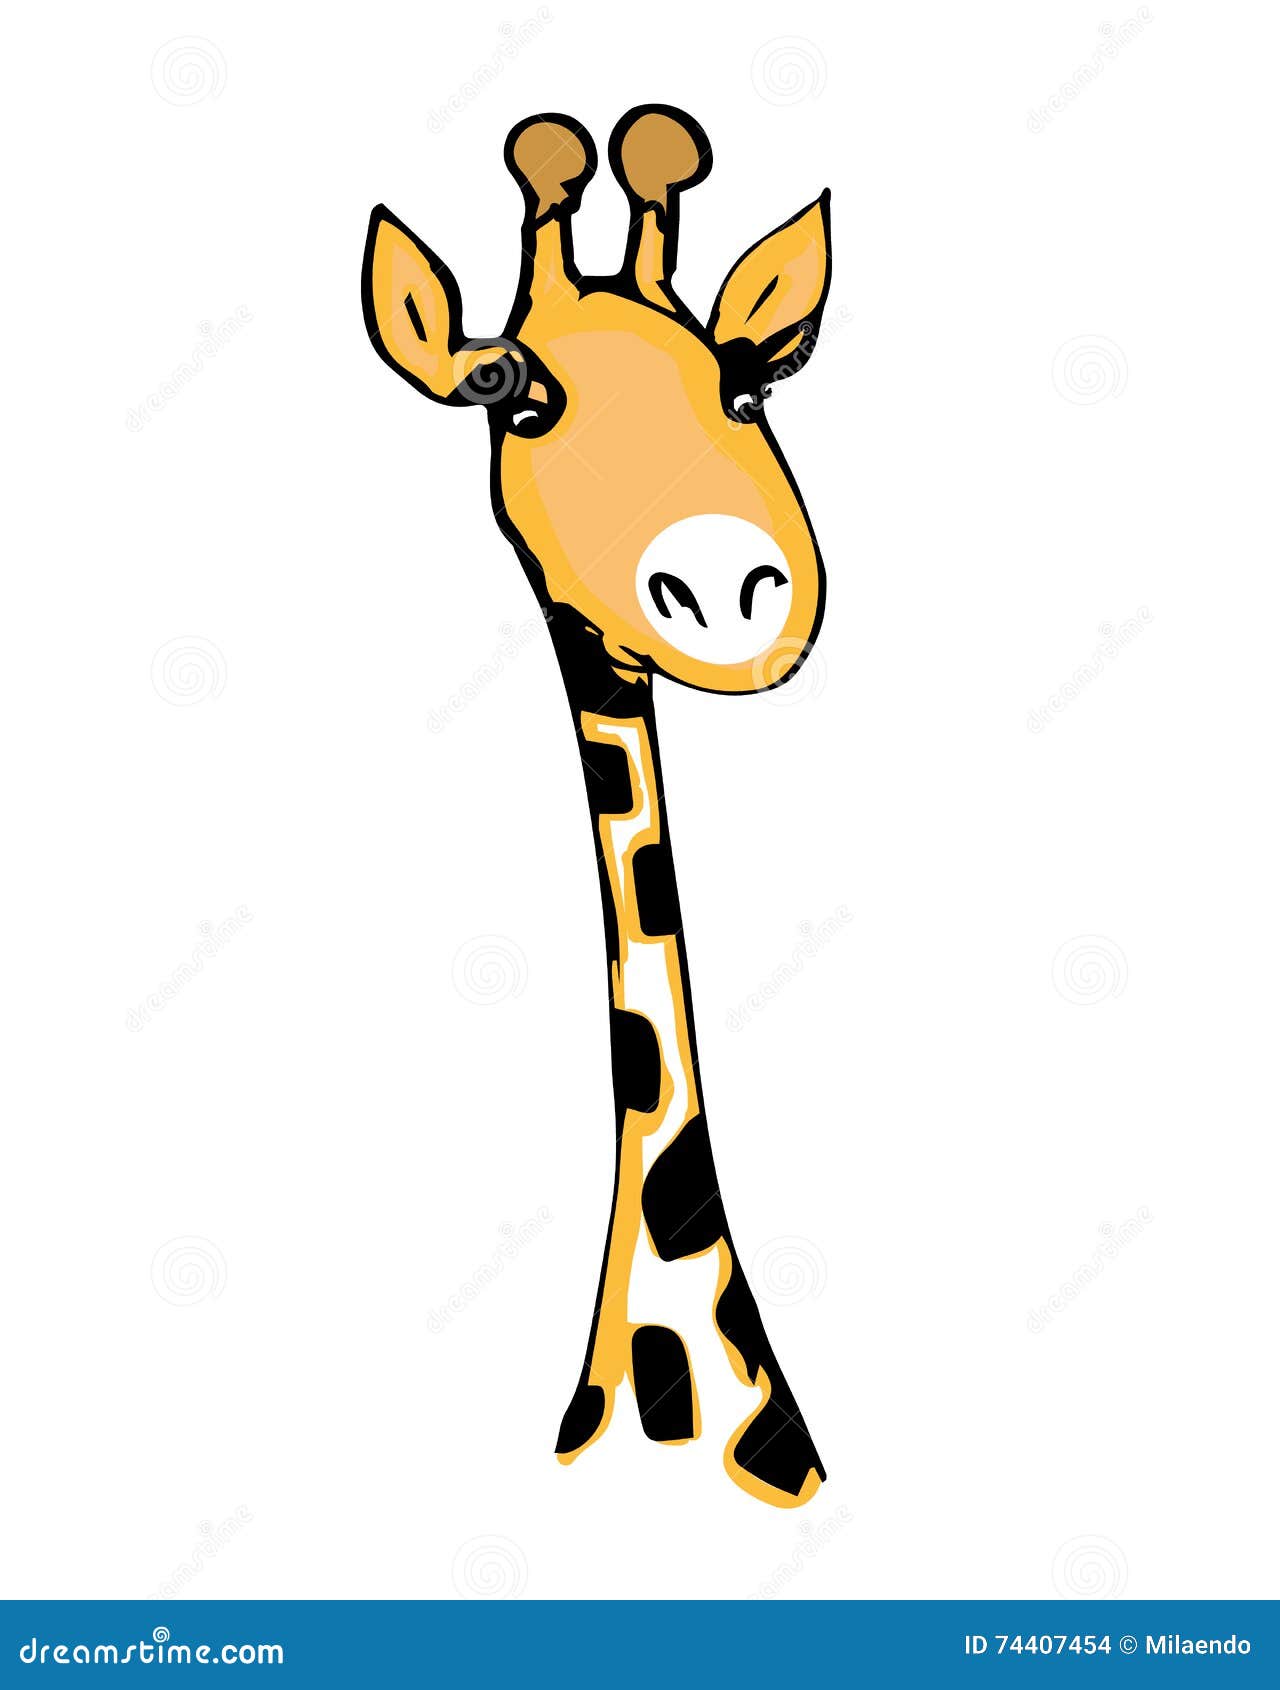 giraffe nature clipart two dimensional neutral color for kids easy drawing  childish cute illustration sweet - Clip Art Library